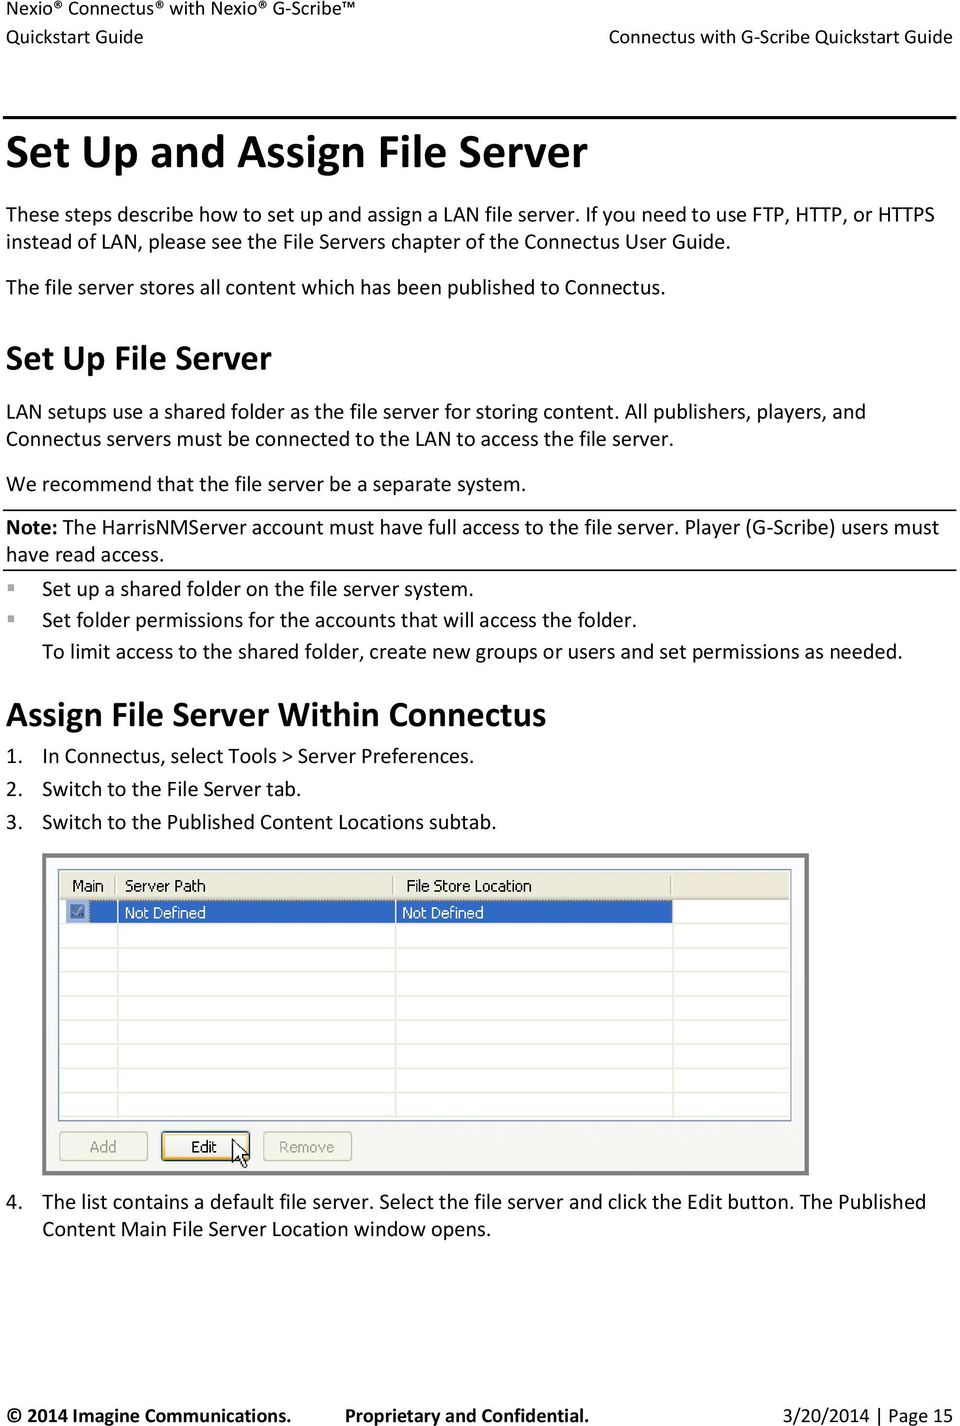 Set Up File Server LAN setups use a shared folder as the file server for storing content. All publishers, players, and Connectus servers must be connected to the LAN to access the file server.